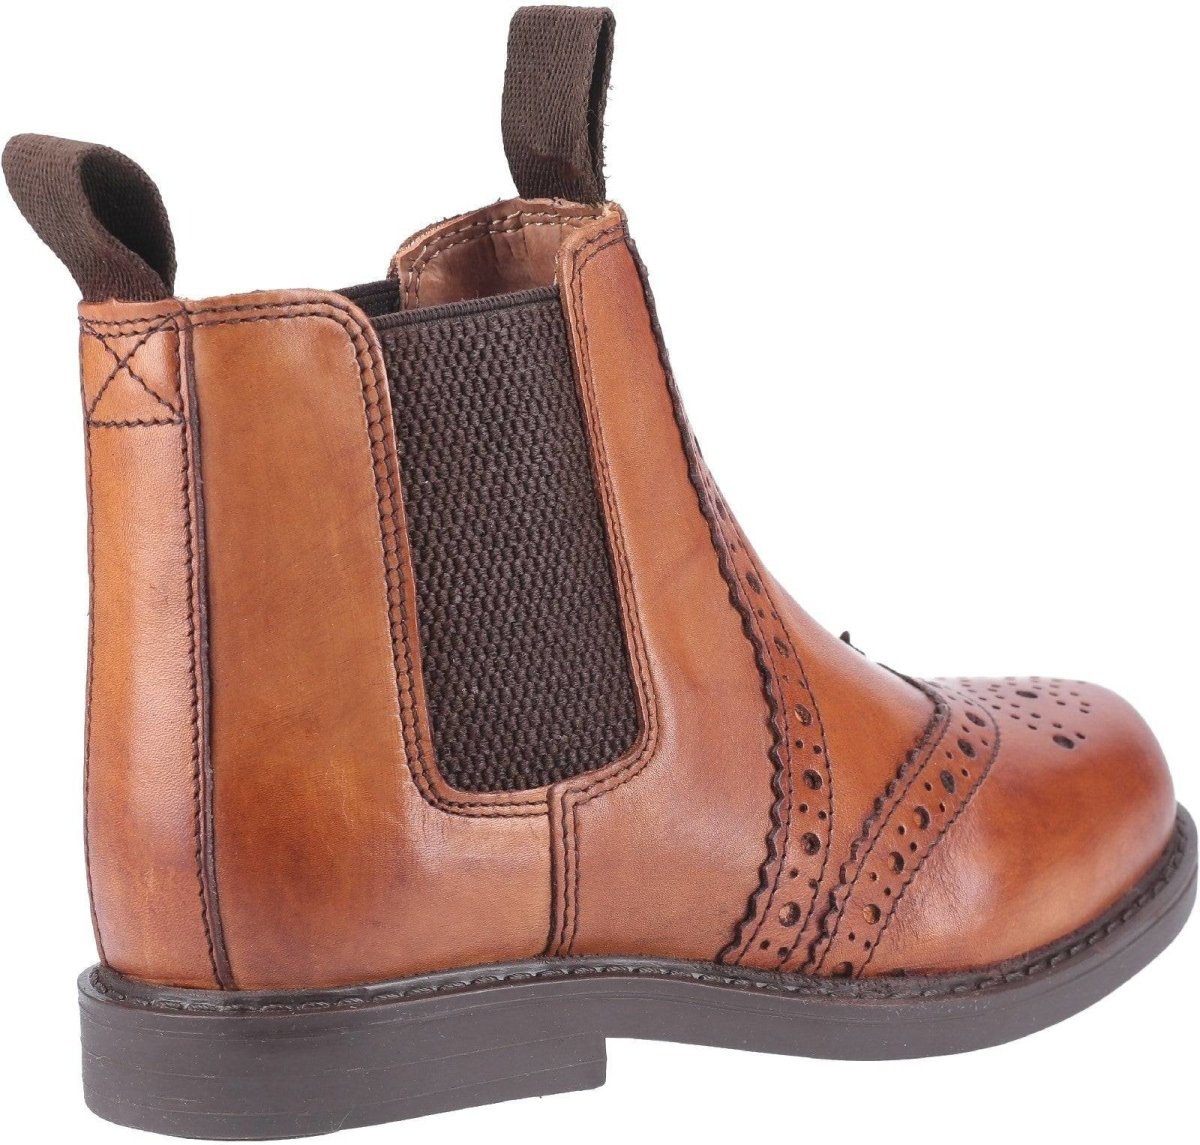 Cotswold Nympsfield Kids Brogue Chelsea Boots - Shoe Store Direct